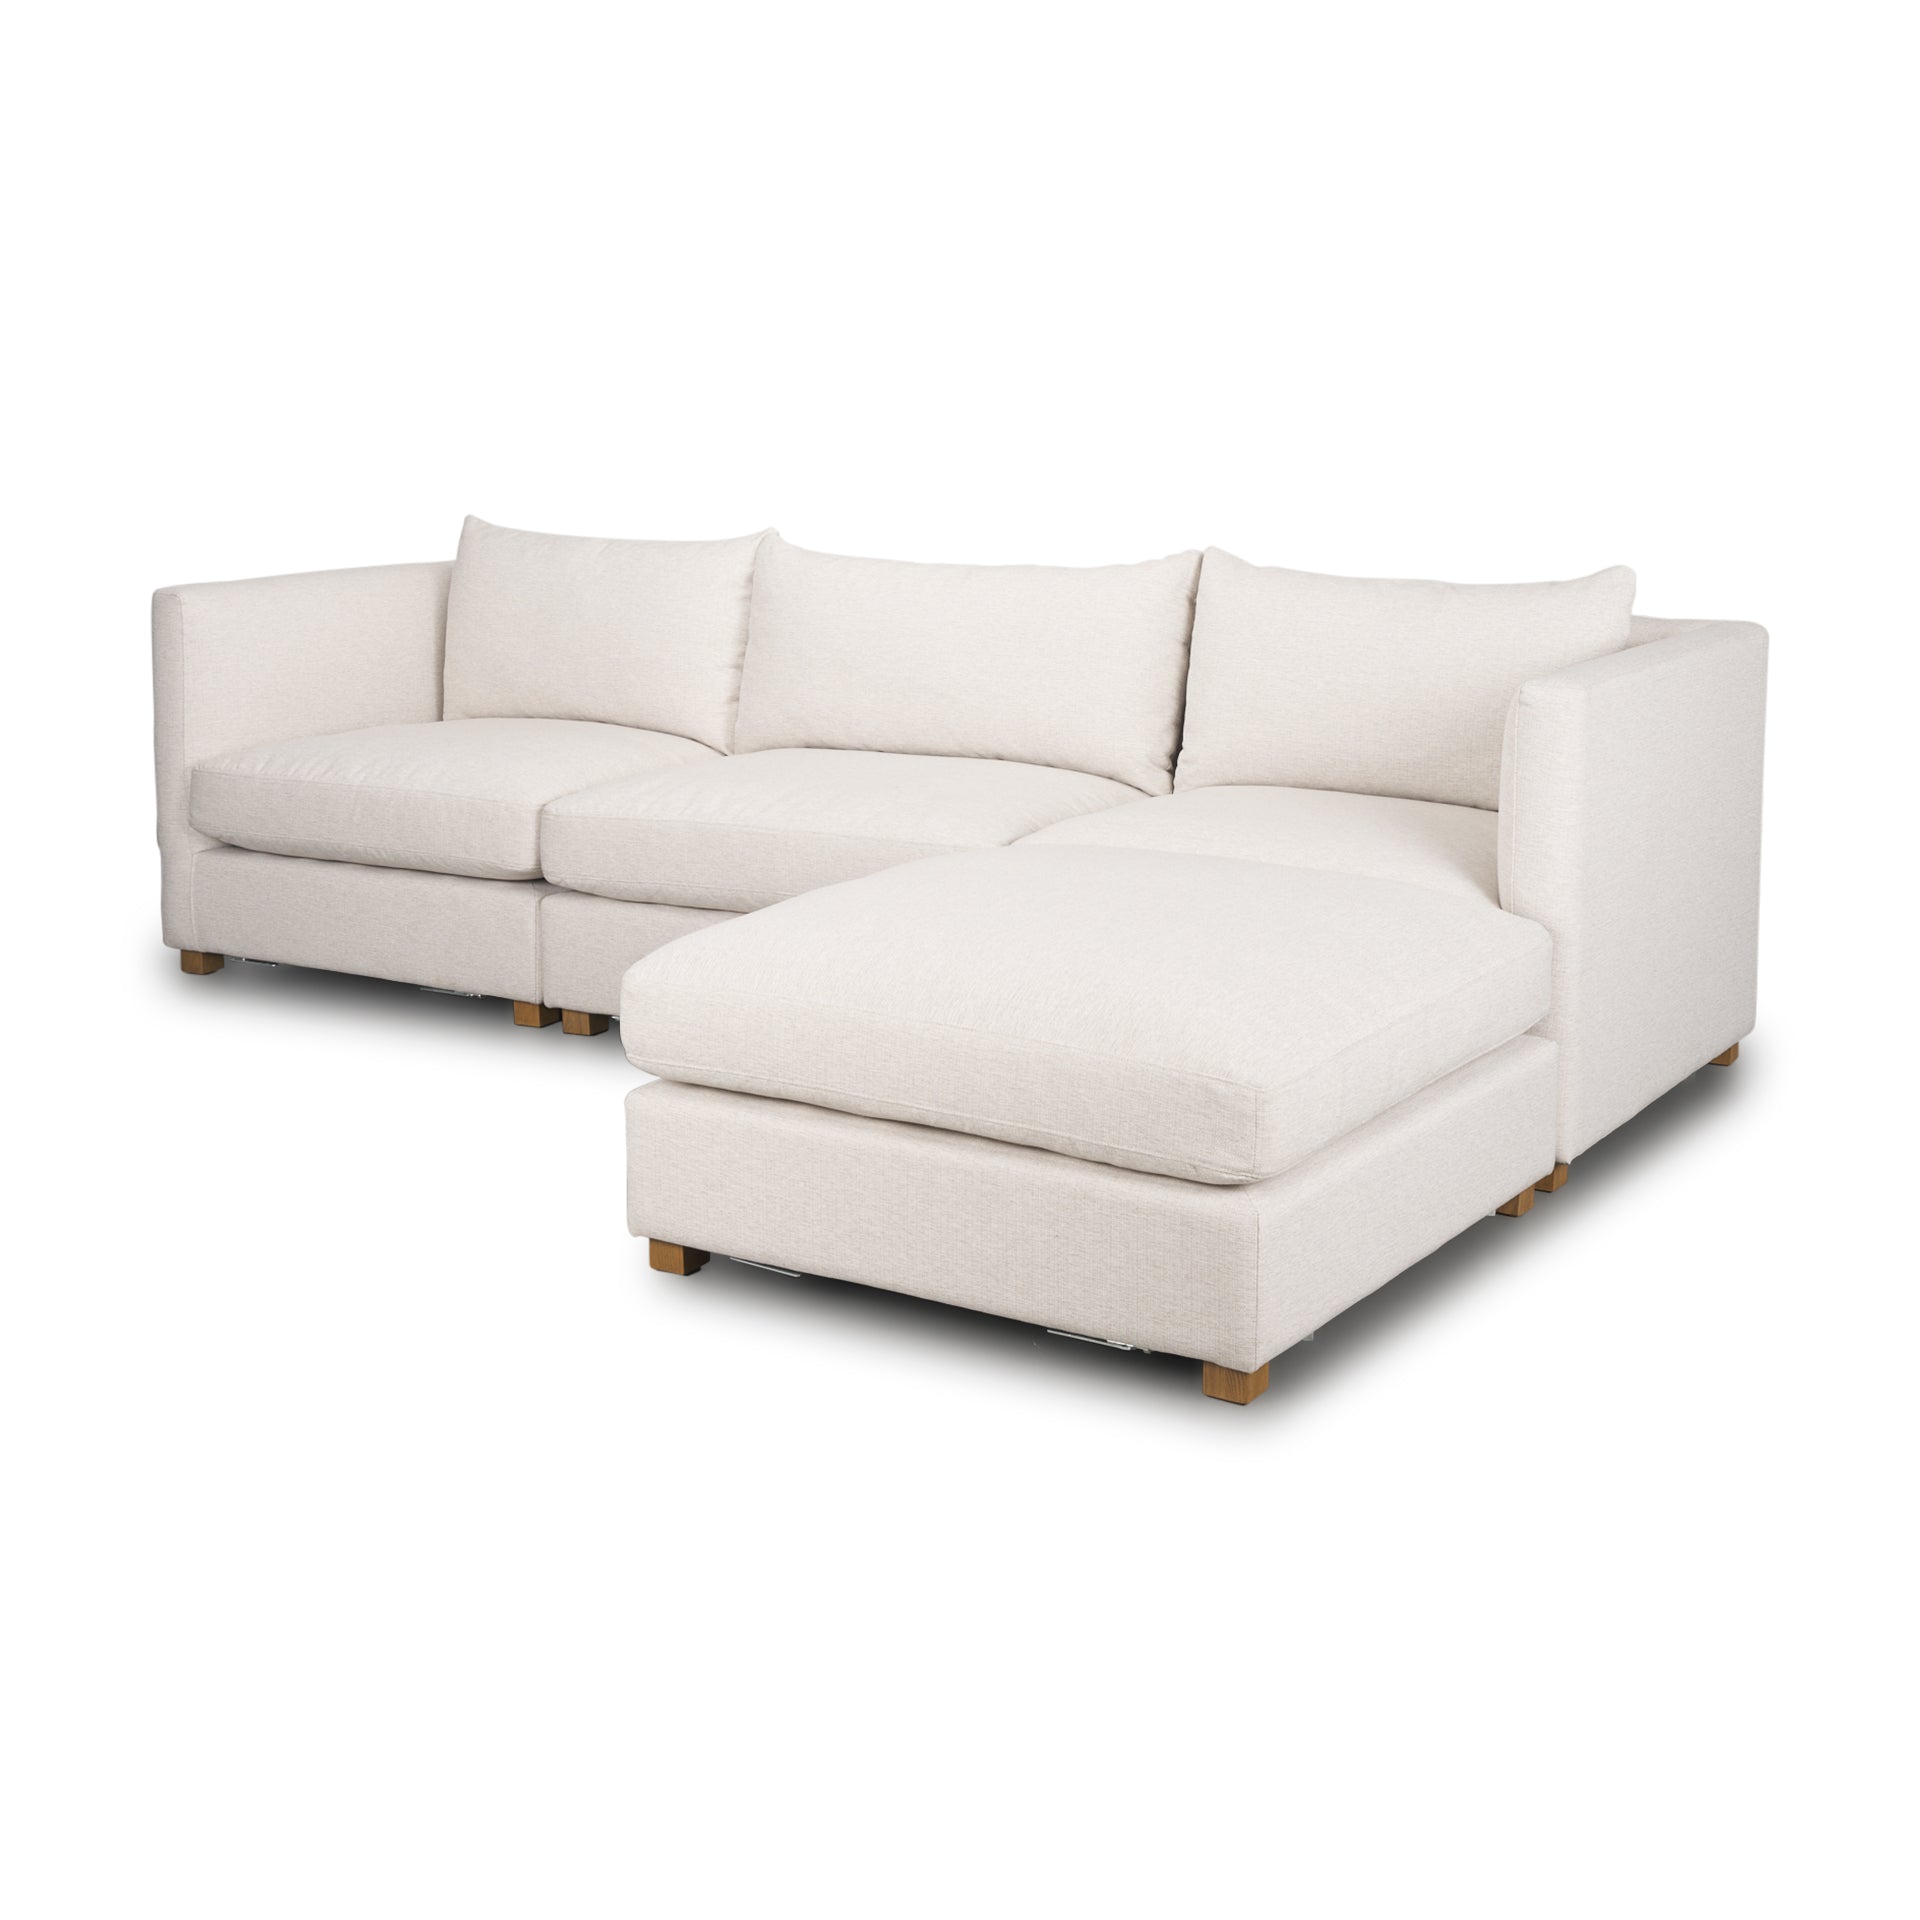 Haley Chaise Sectional- Oatmeal